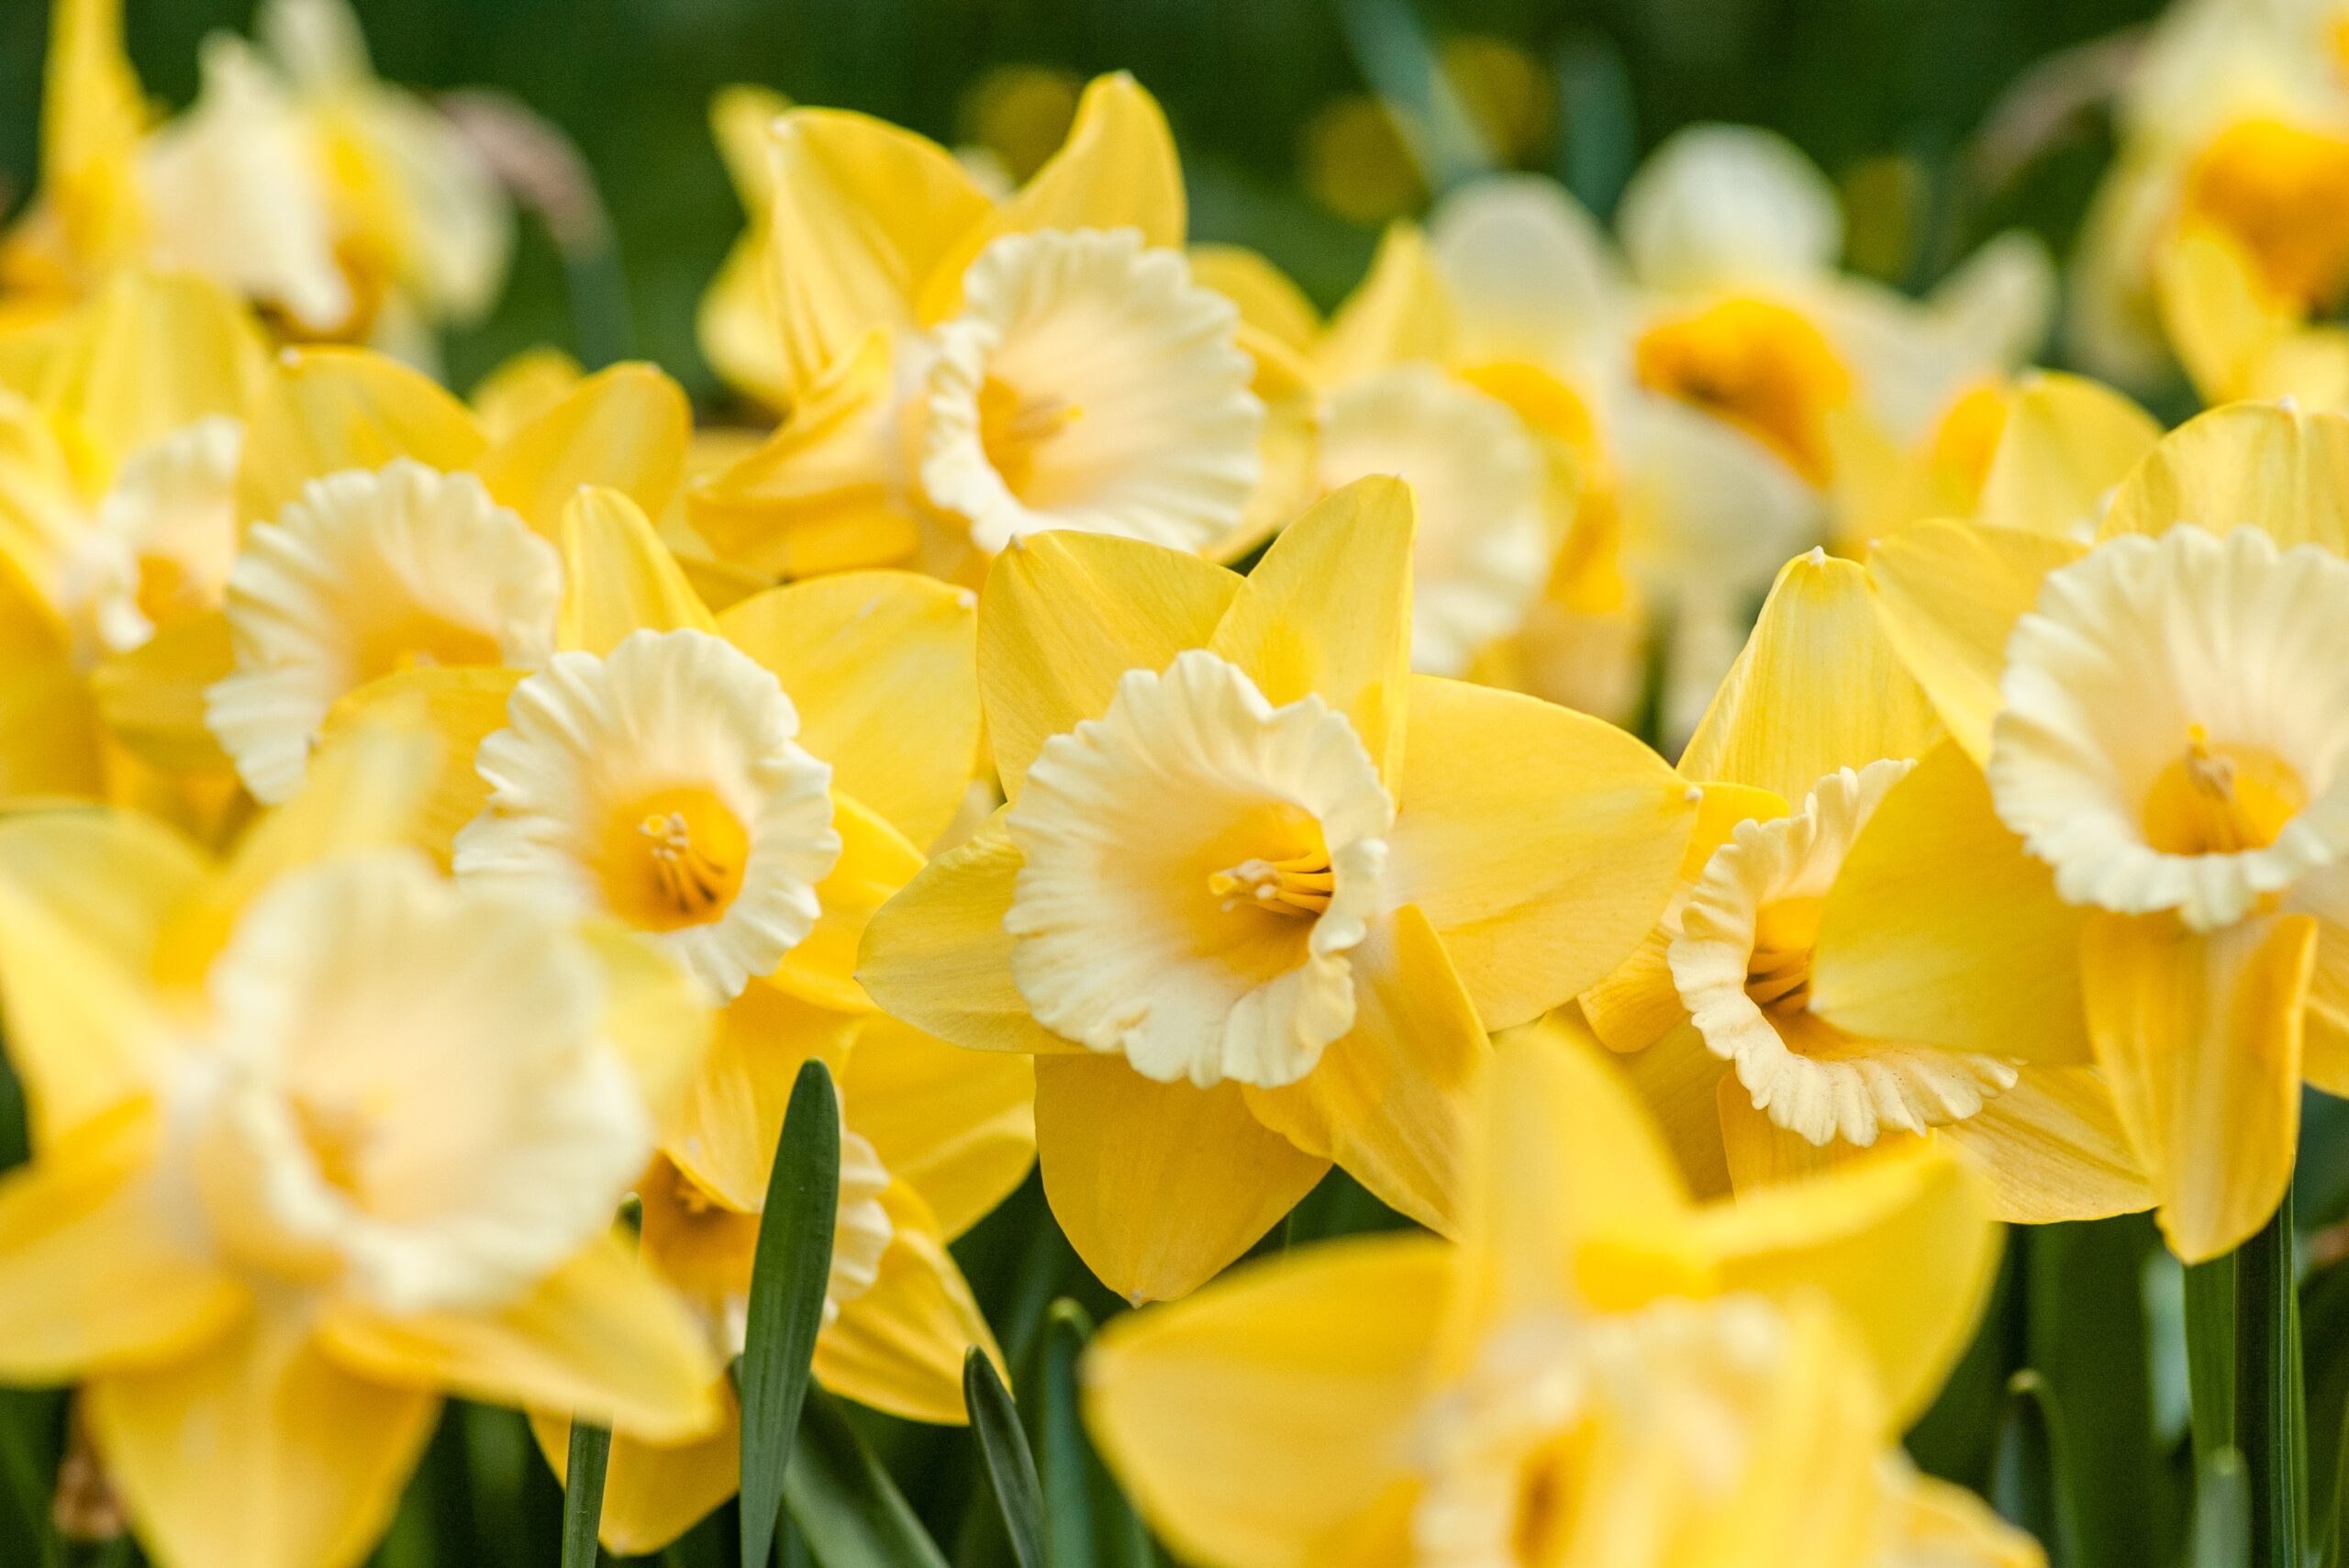 How to plant and grow daffodils